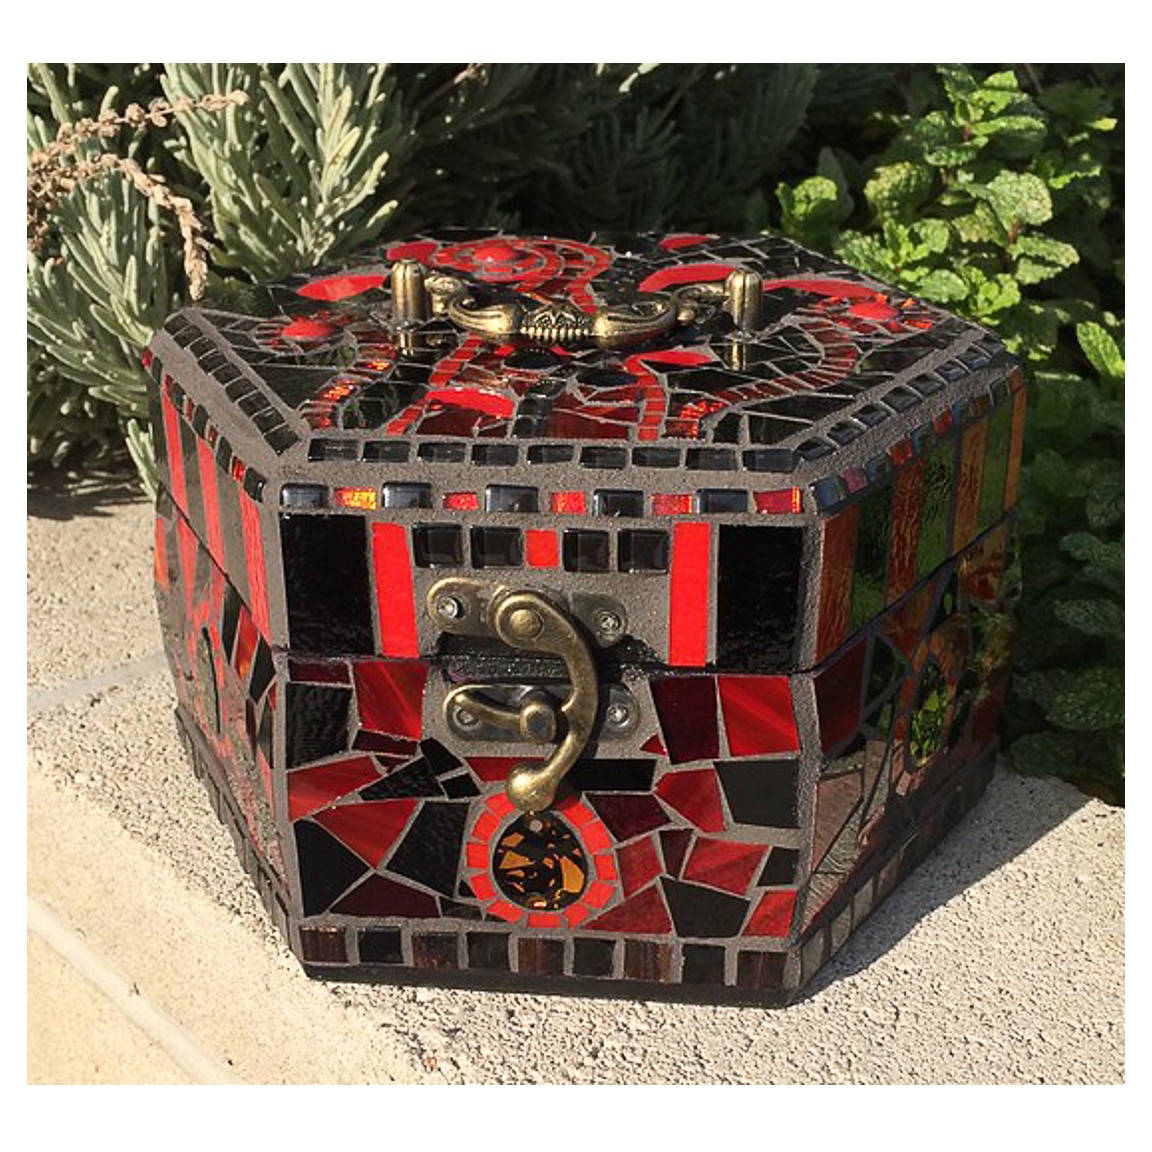 Contemporary mosaic artbox by Victor of Piece by Piece Los Angeles nonprofit ig